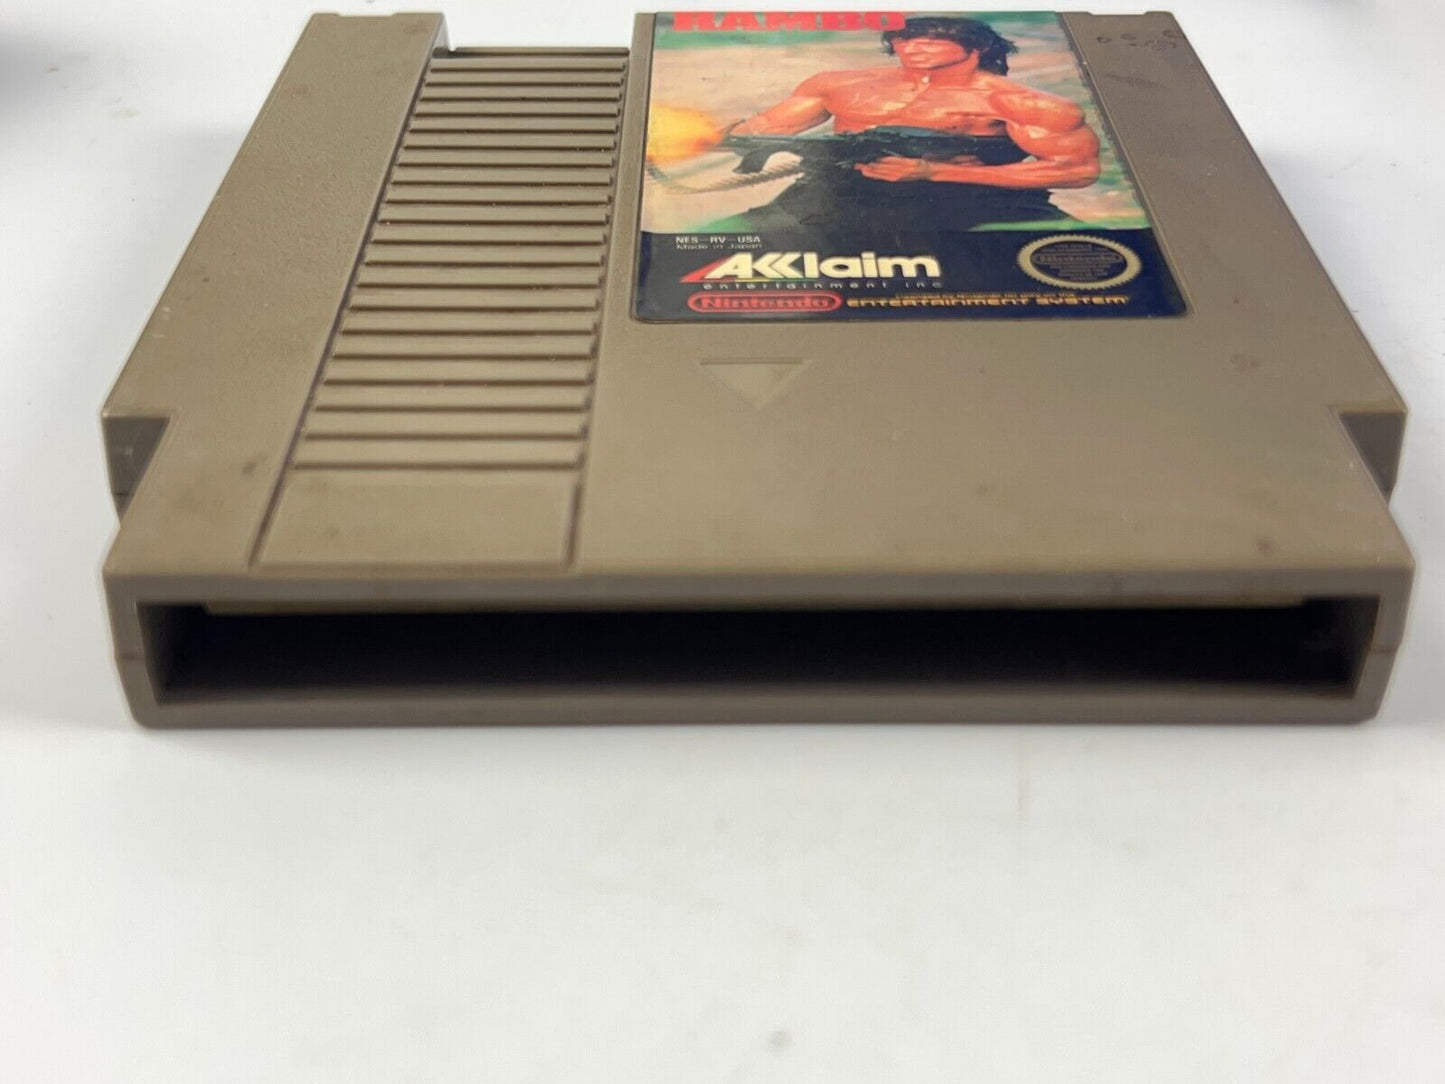 Rambo - Nintendo NES Game Authentic Tested